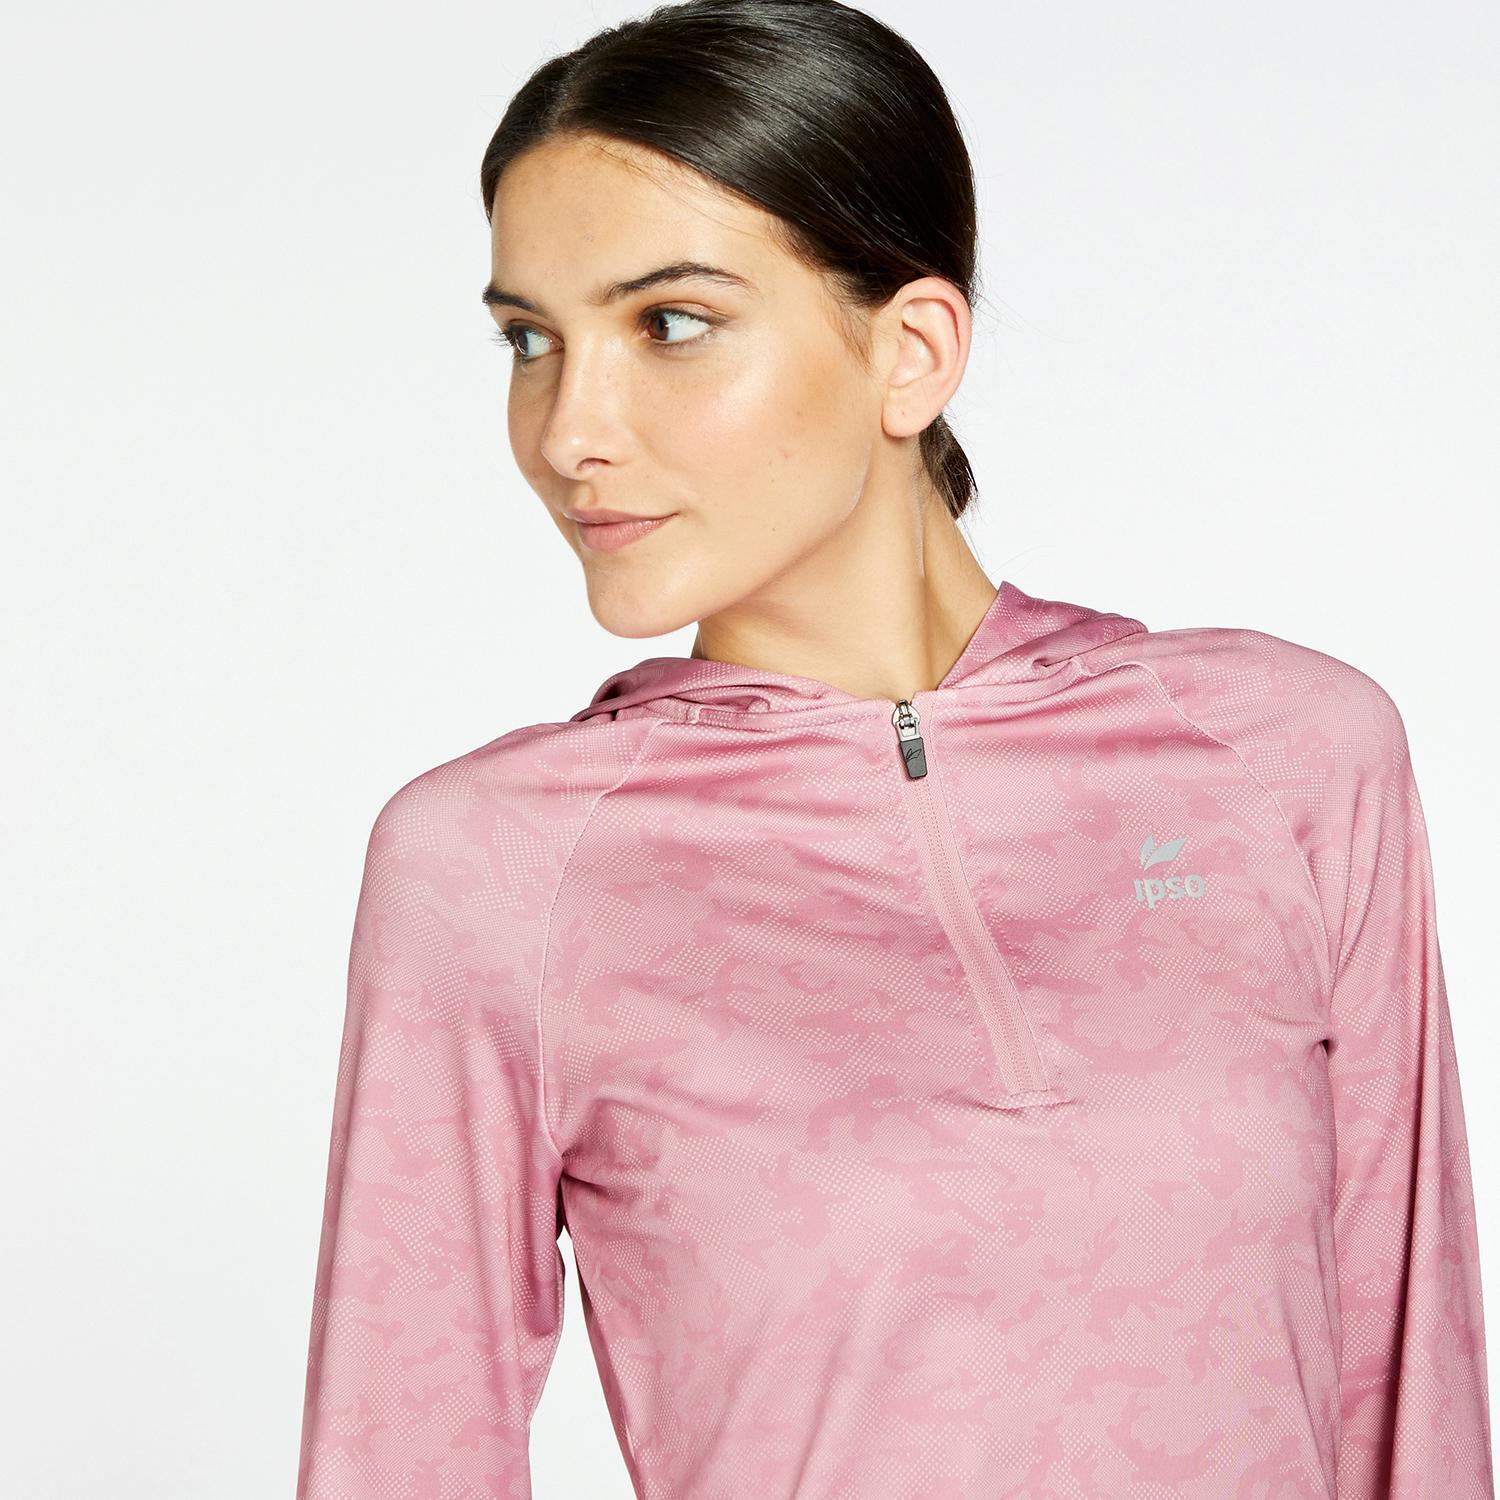 Ipso Experience 1 - Rose - Sweat thermique femme sports taille XL